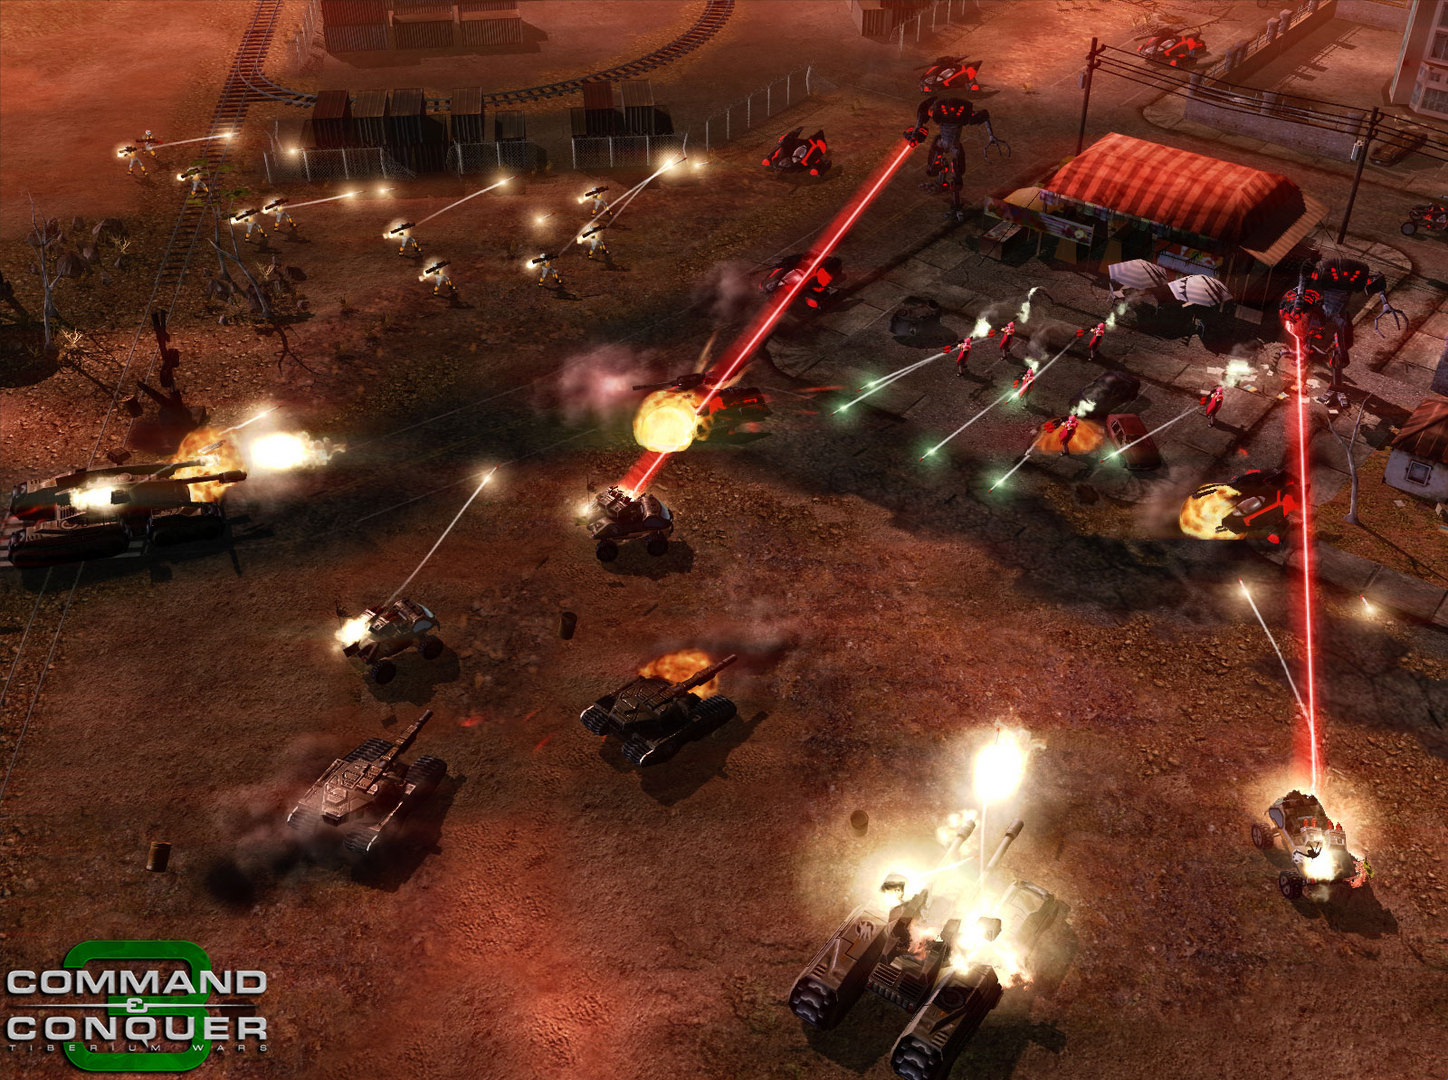 Find the best laptops for Command & Conquer 3 Tiberium Wars